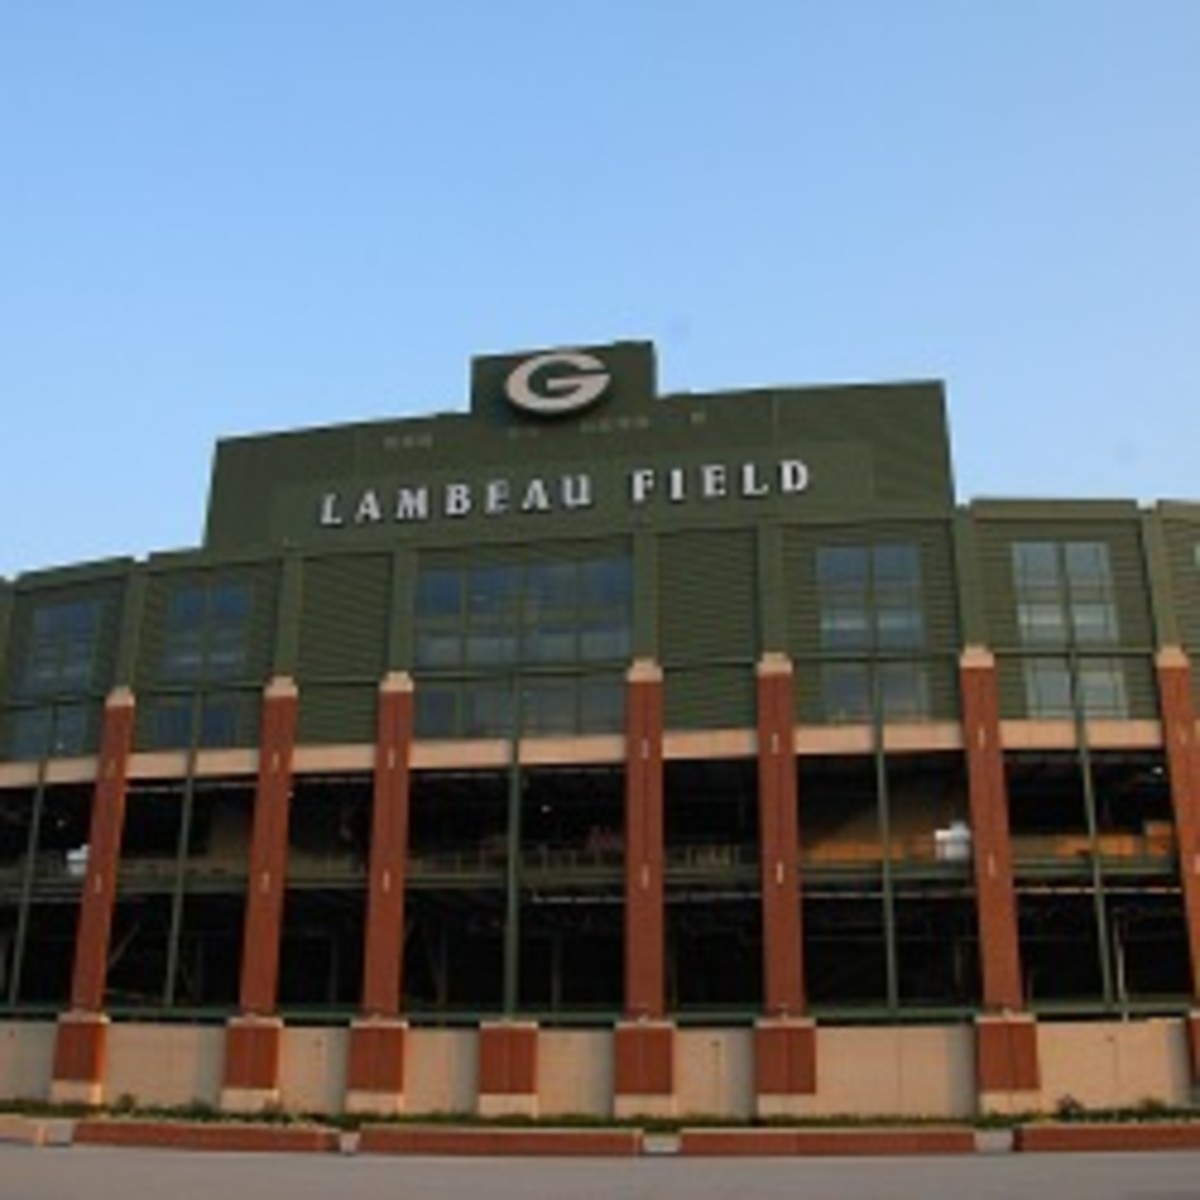 Lambeau Field could be the site of a University of Wisconsin football game soon. (Karen Bleier/Getty Images) 